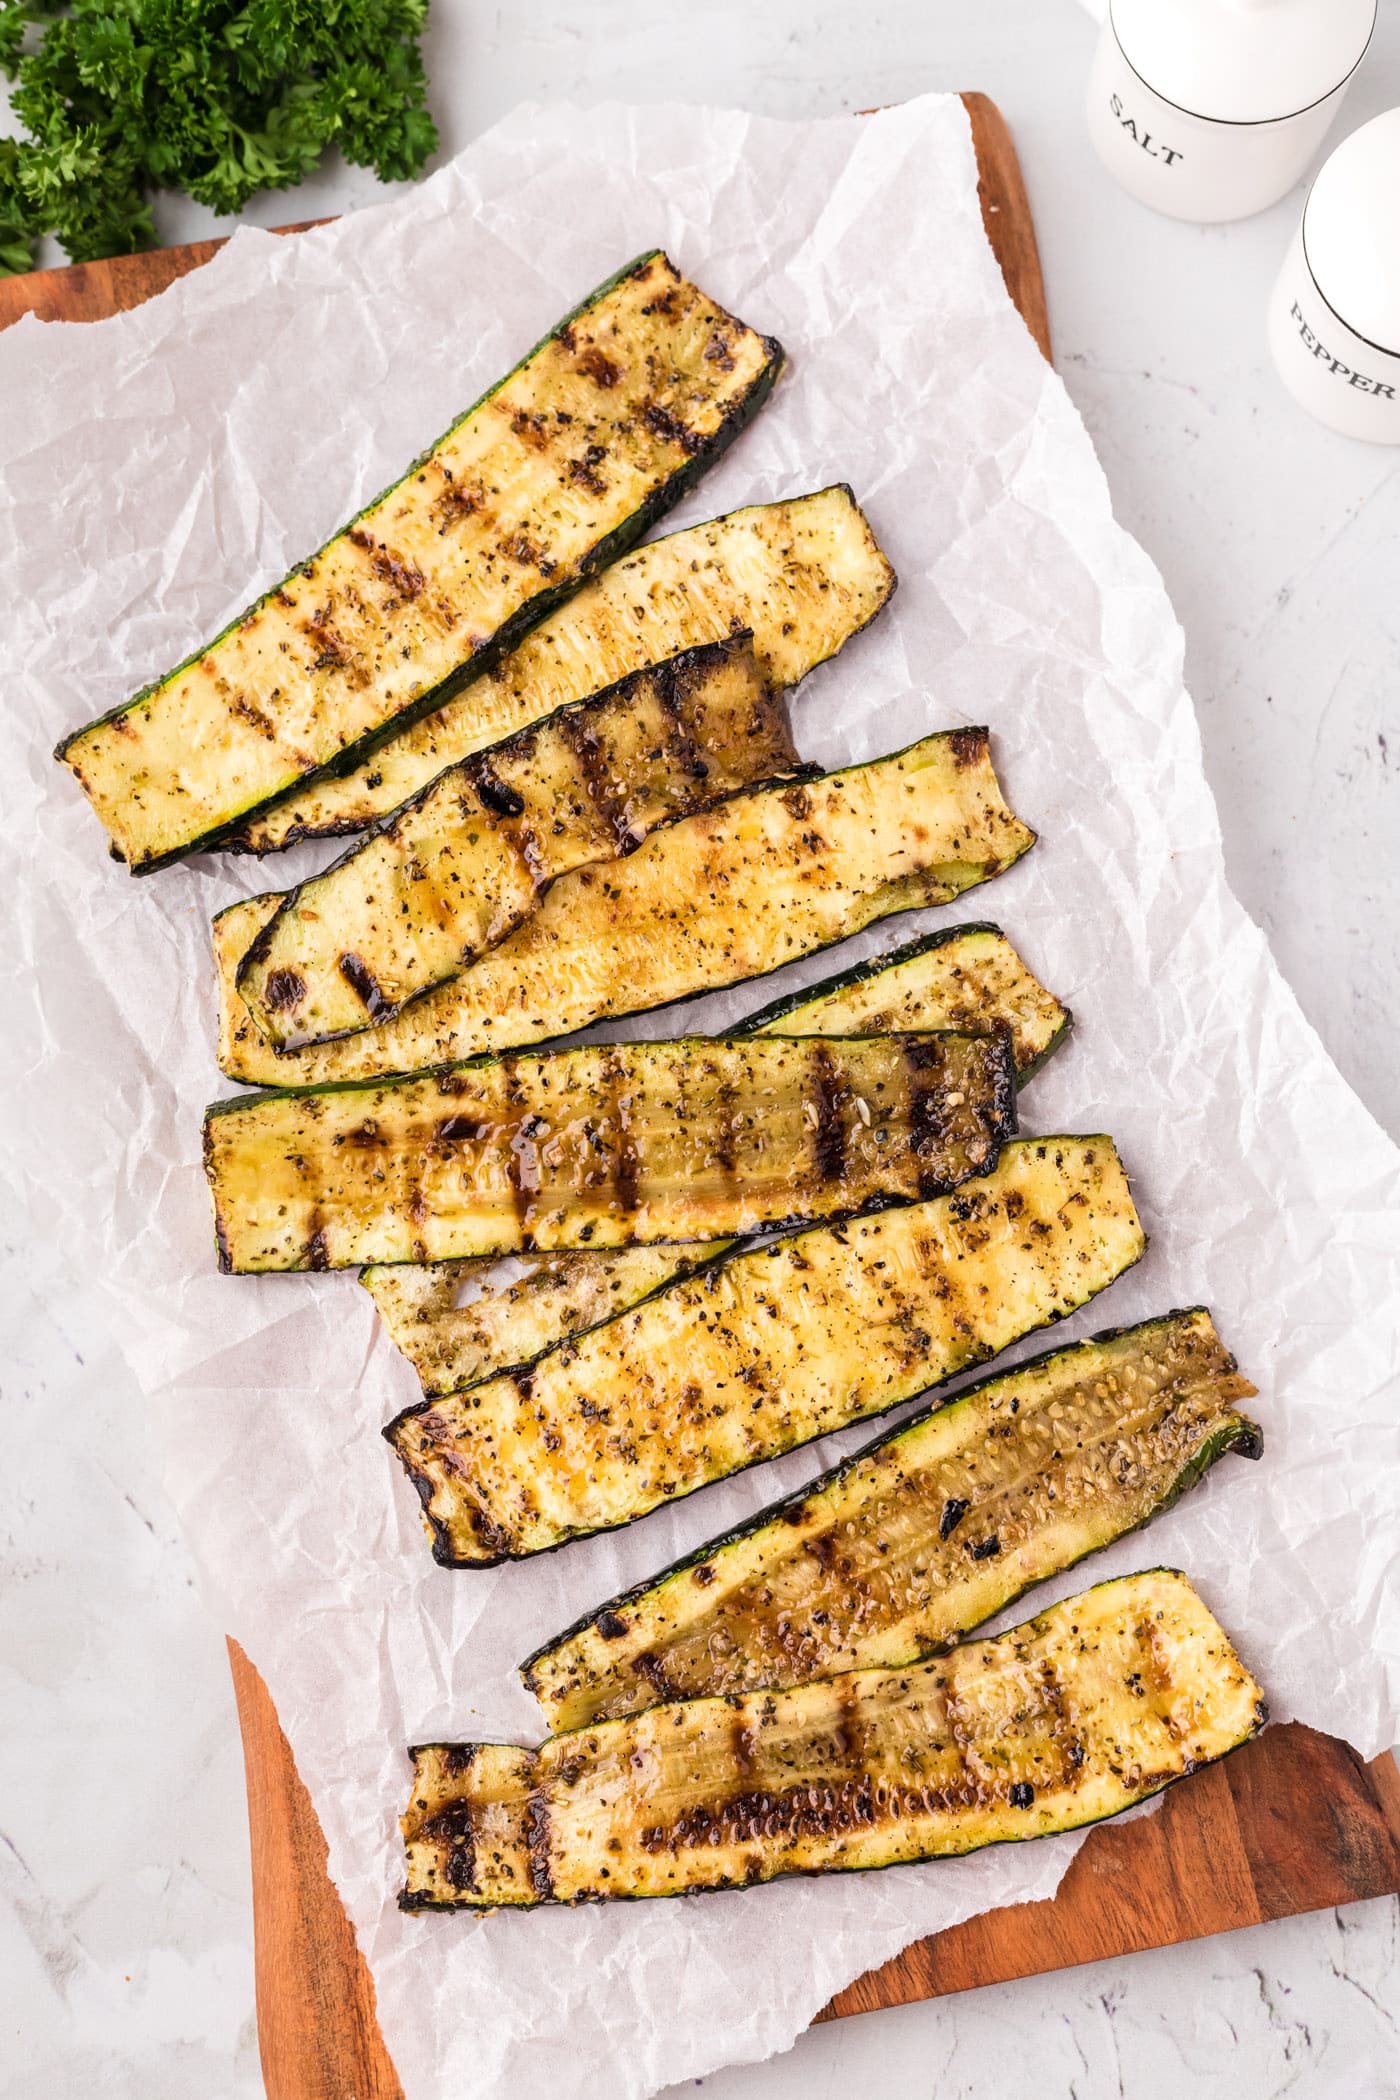 Grilled Zucchini - Amanda's Cookin' - On the Grill